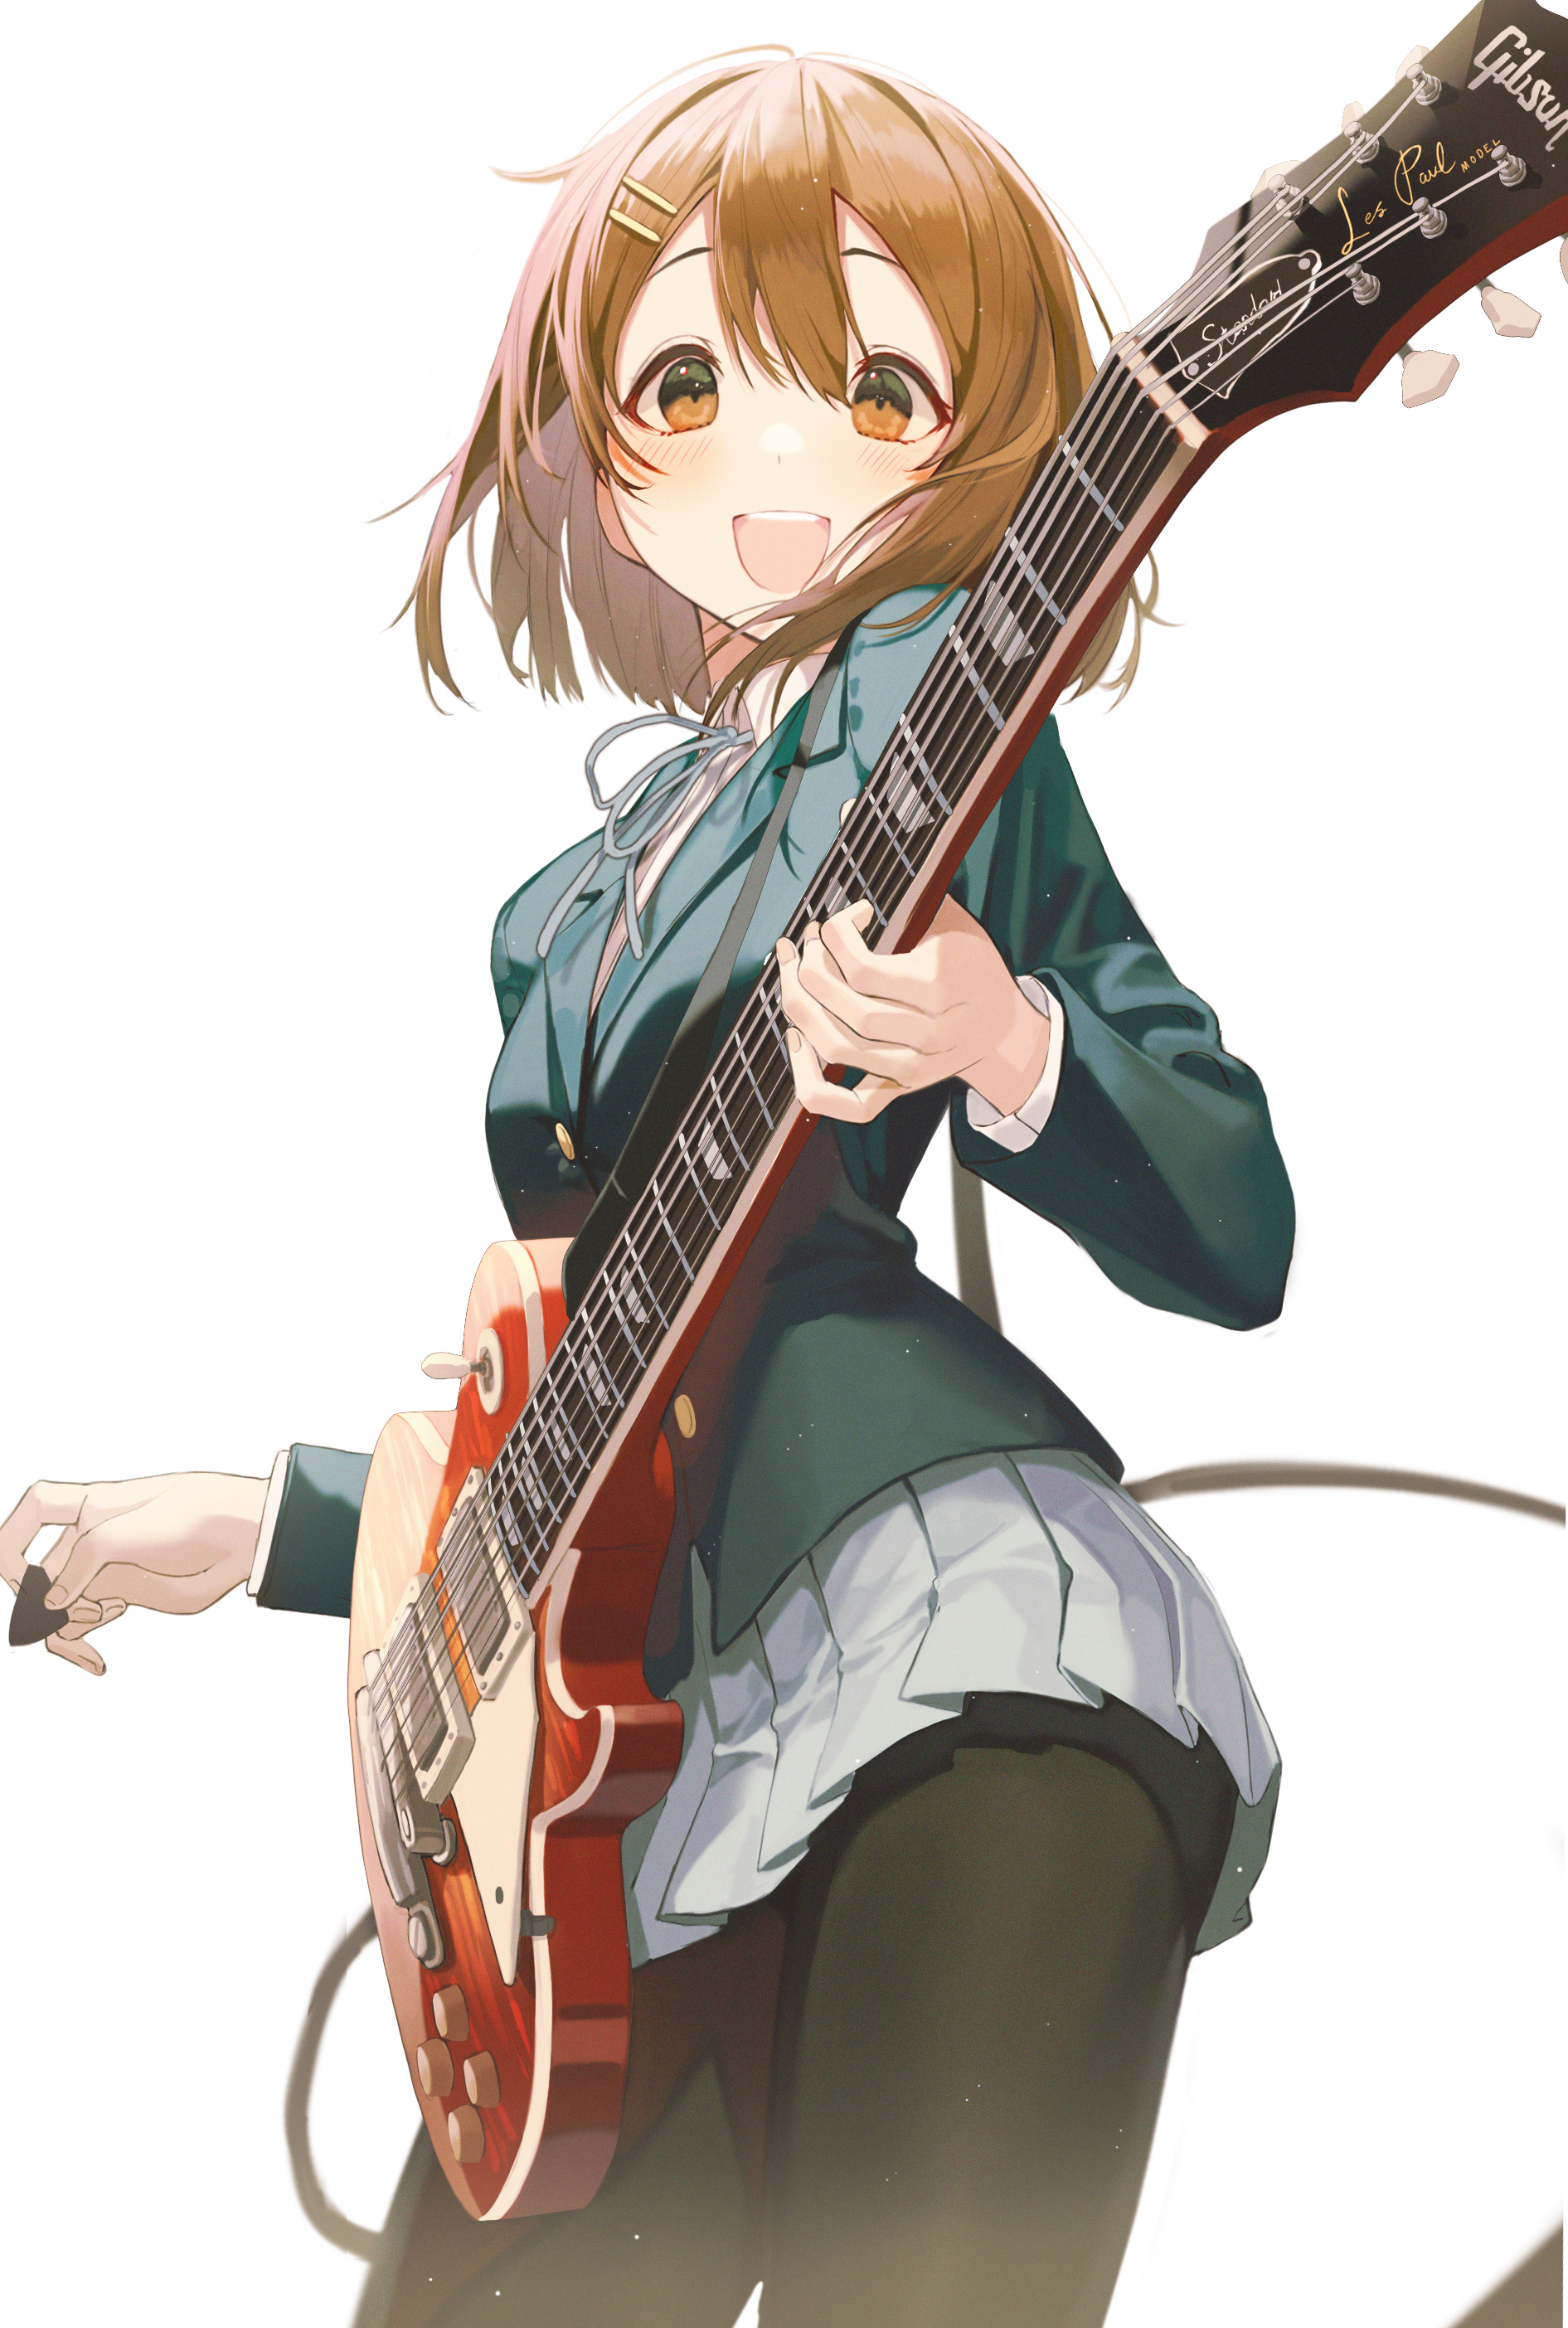 Anime 1891x2807 K-ON! thighs thick thigh pantyhose anime girls electric electric guitar school uniform JK low-angle short hair Hirasawa Yui 2D brunette smiling open mouth musical instrument curvy blushing looking at viewer miniskirt brown eyes simple background portrait display Pro-p fan art anime